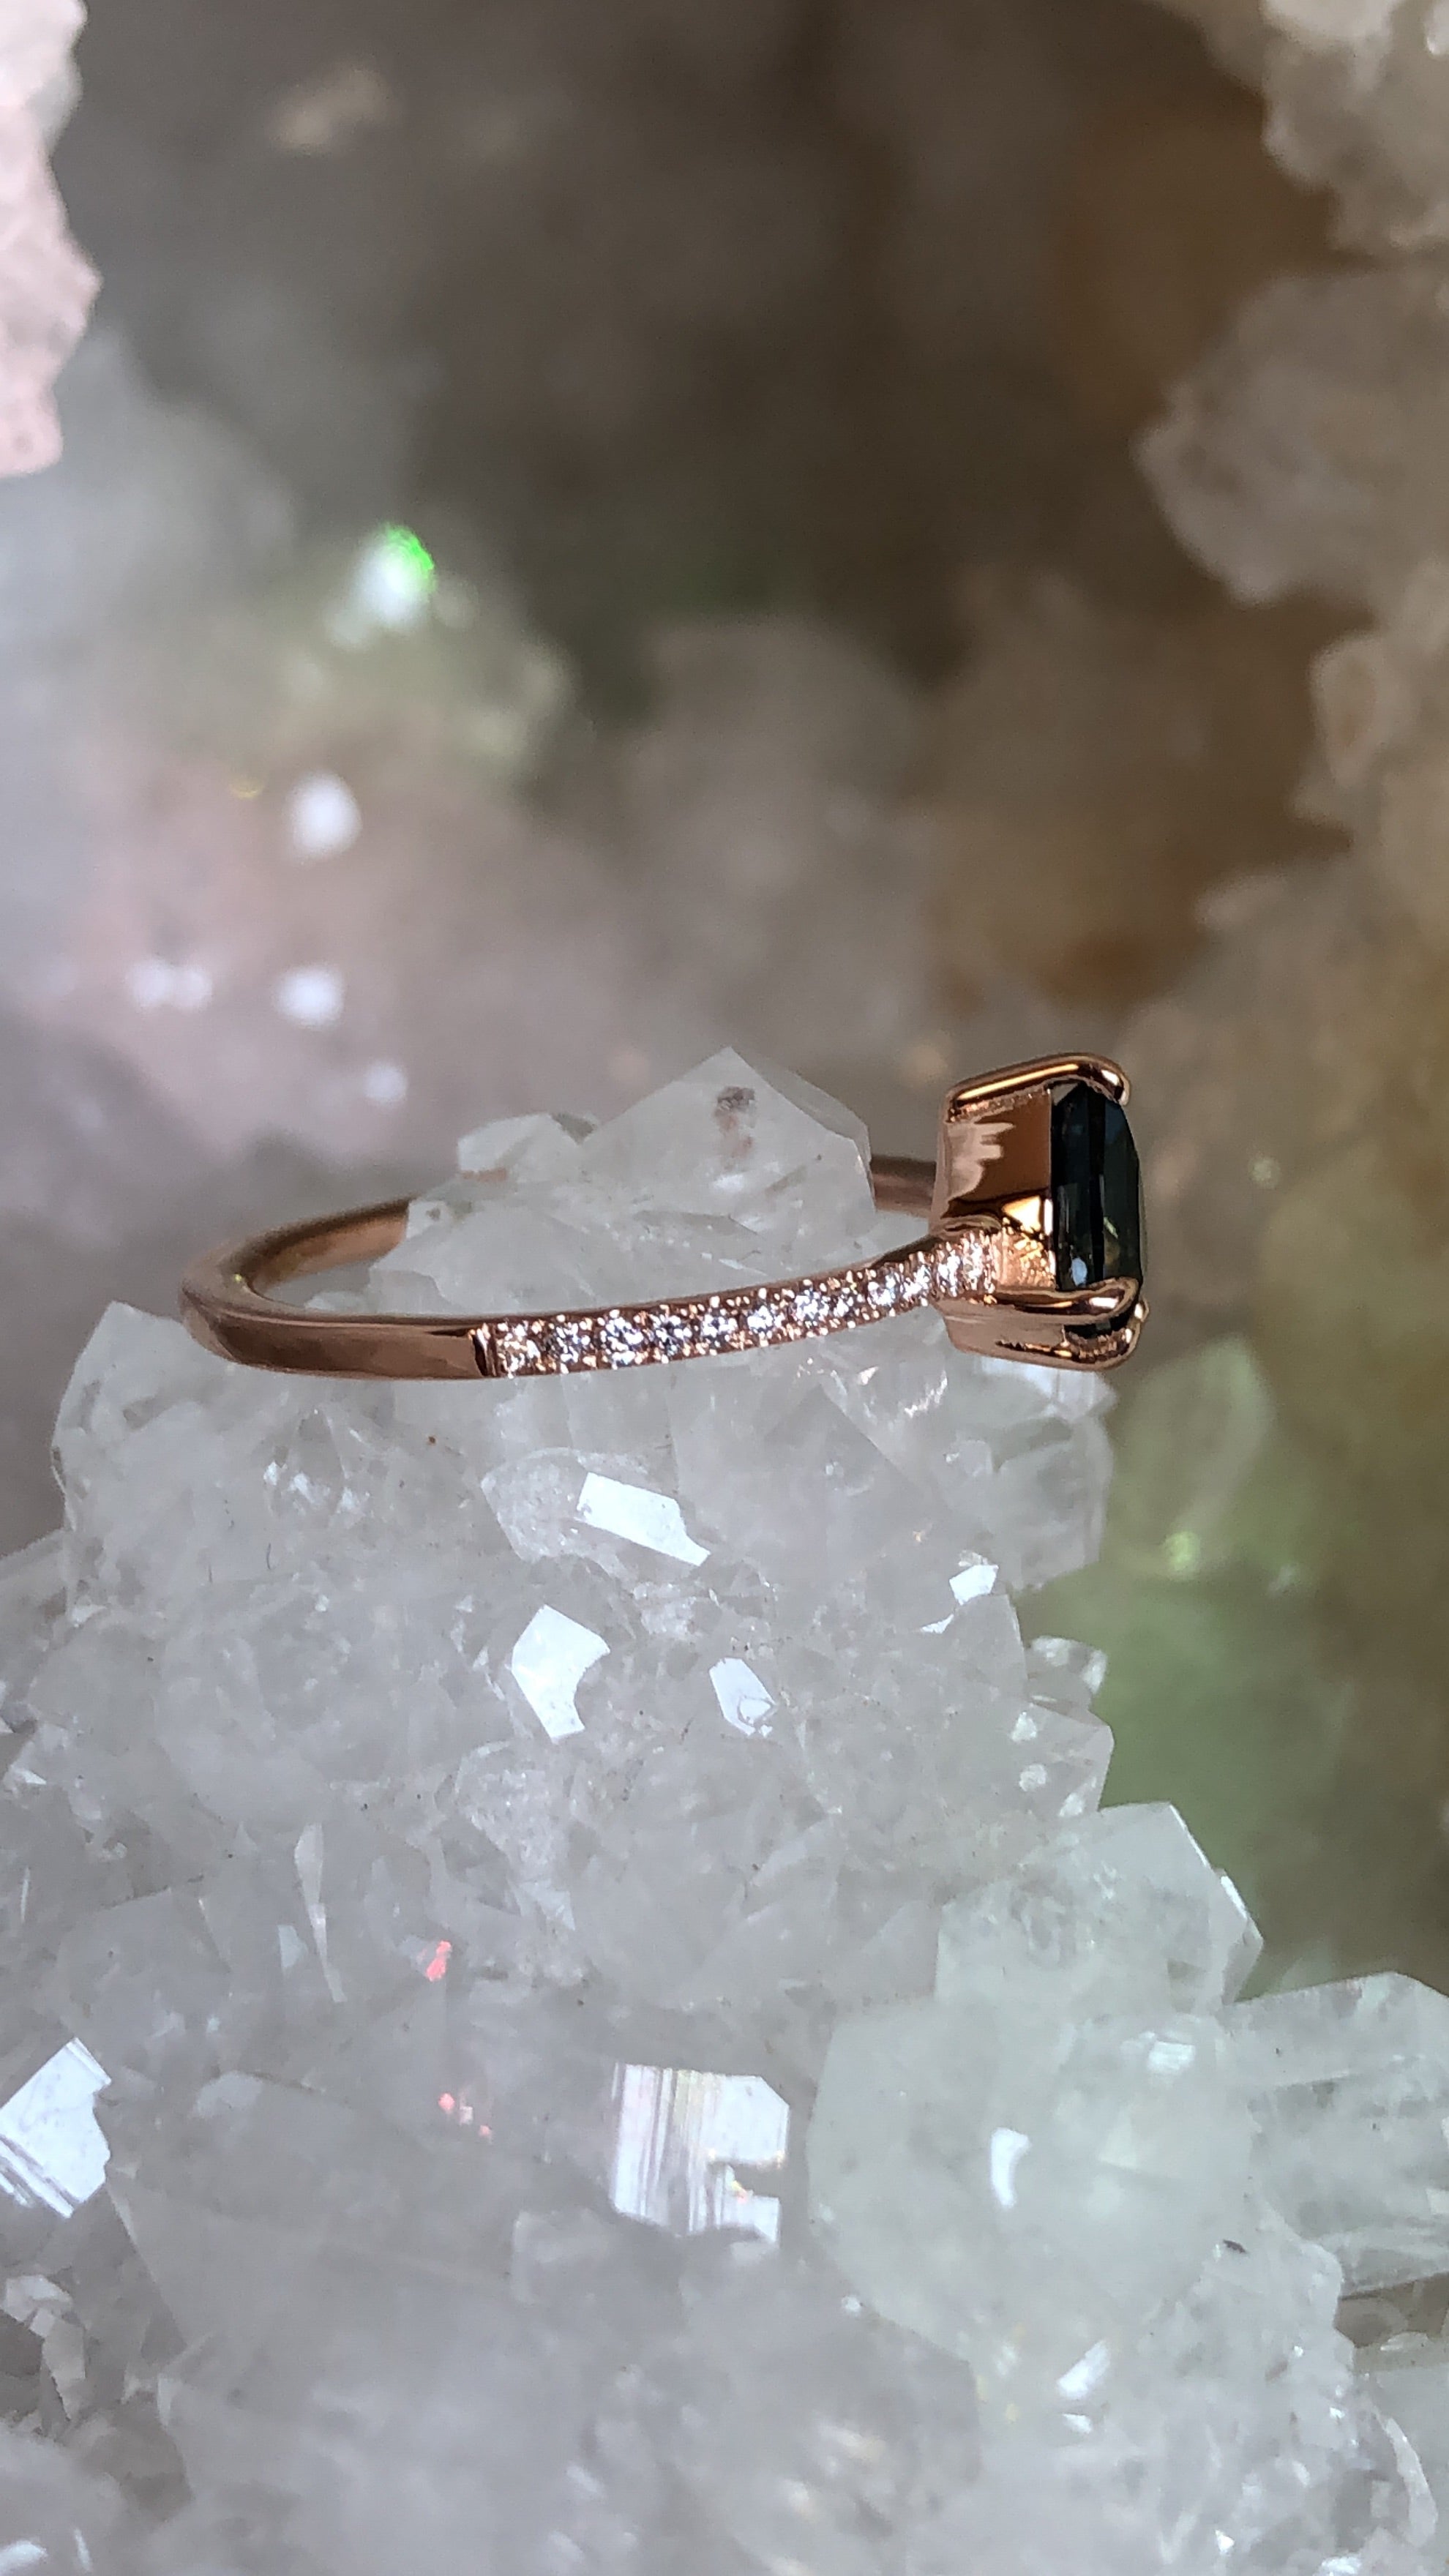 Ring - Australian Sapphire .92 CT Teal Pear Cut with Diamond band in 14k Rose Gold